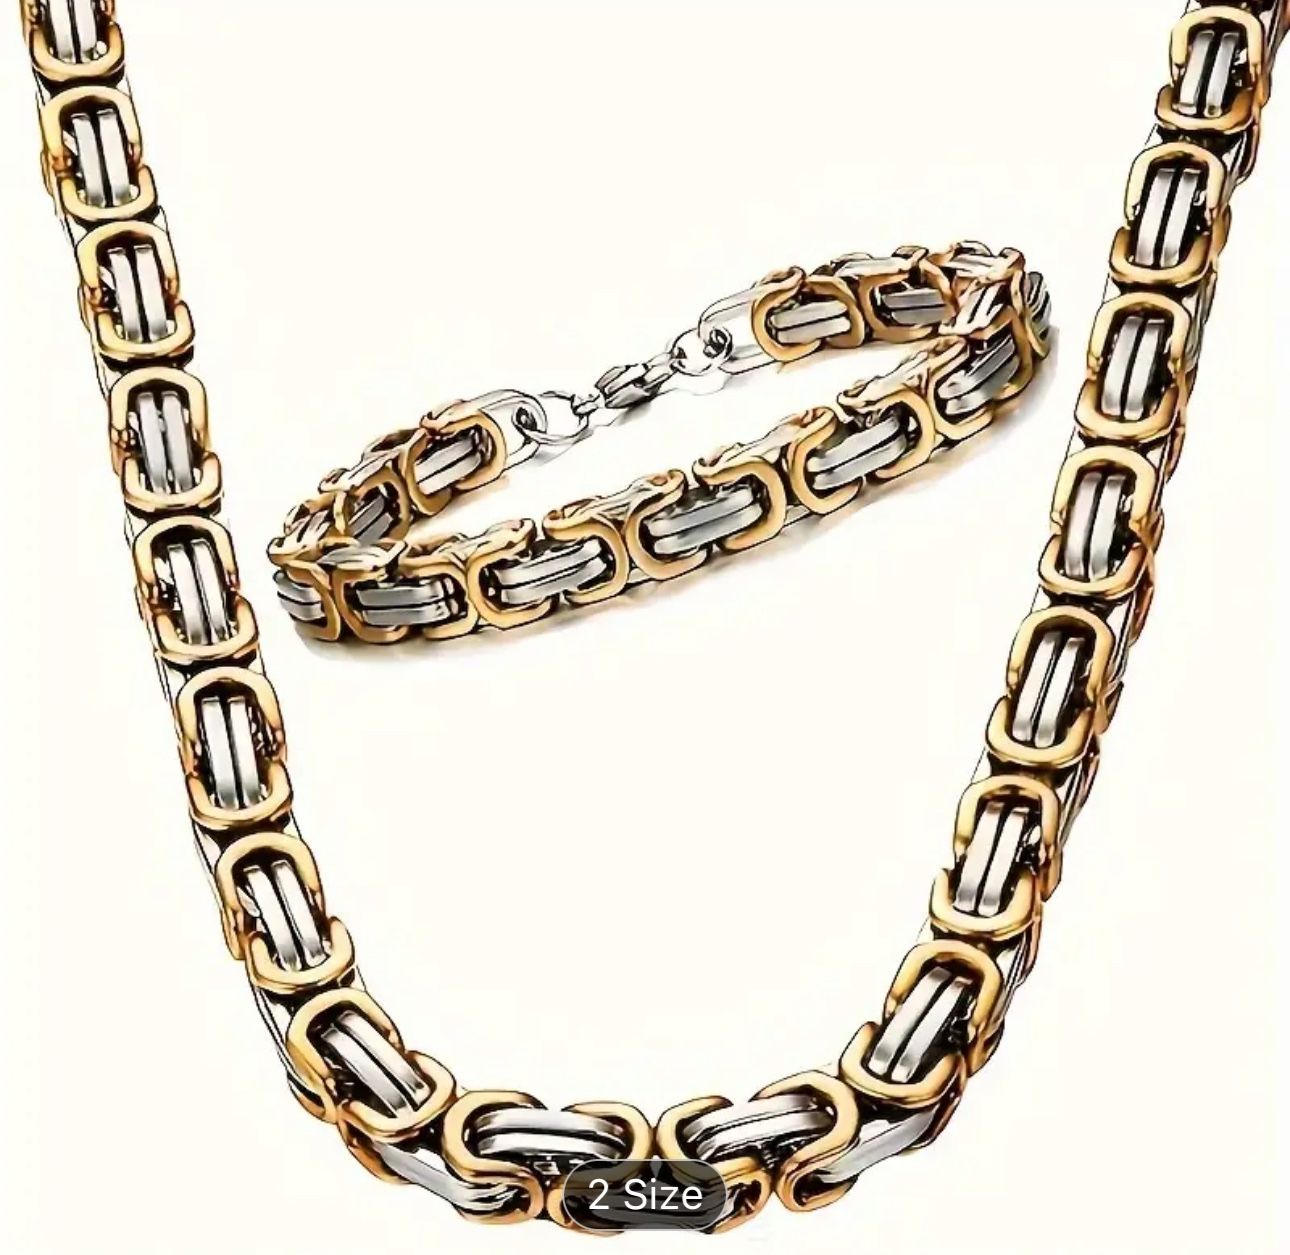 2pcs/set (Necklace + Bangle) Stainless Steel Golden Plated Jewelry, 6mm Cool Chain  Necklace And Bracelet Set